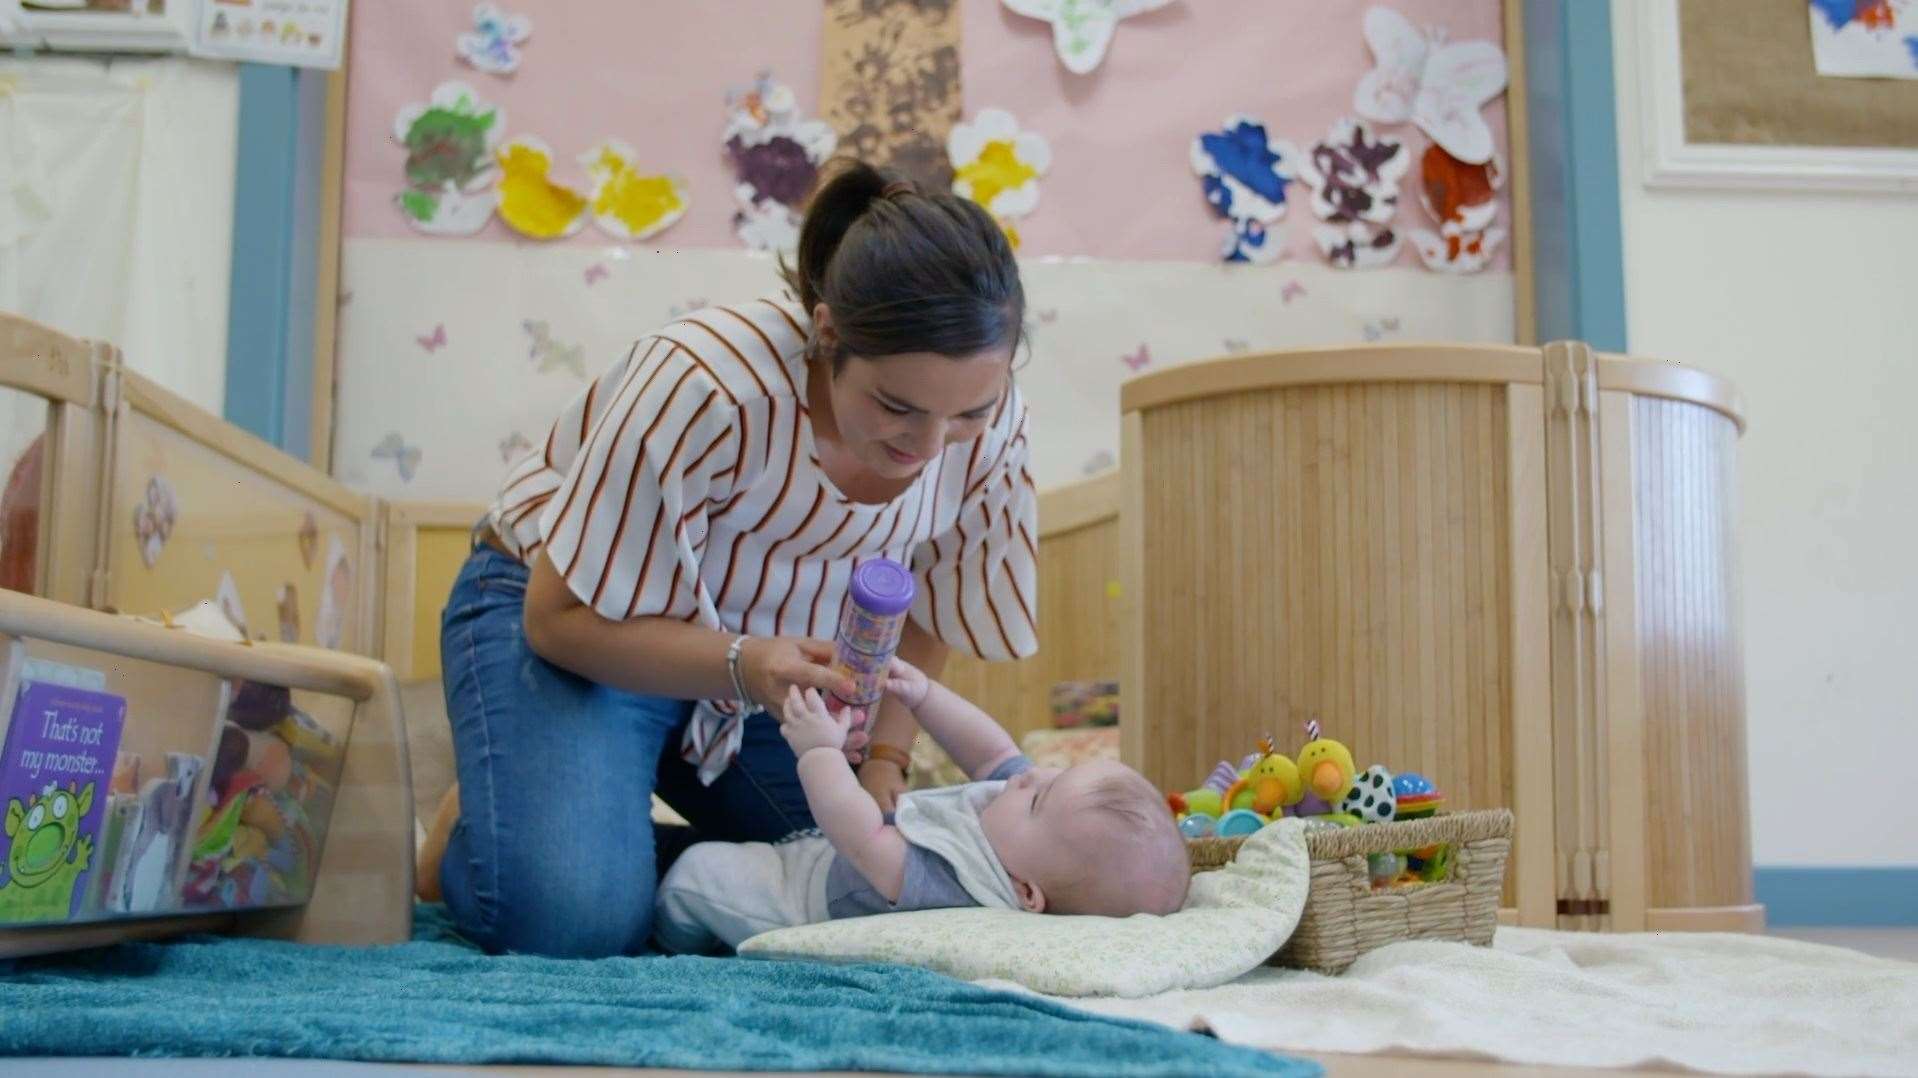 The Science of Making Babies airs tonight at 7.45pm